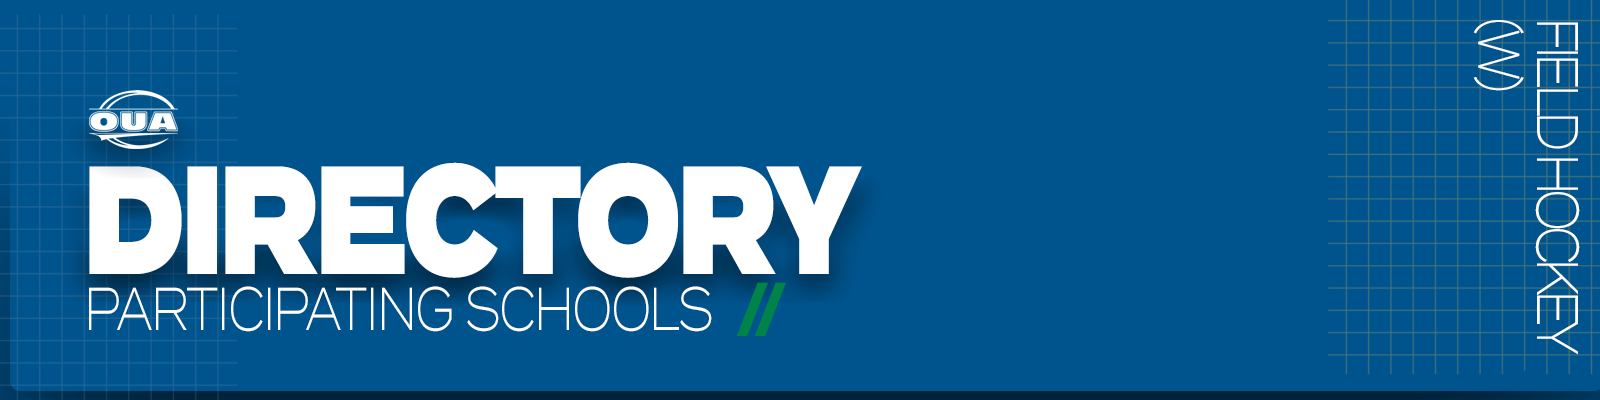 Predominantly blue graphic with large white text on the left side that reads 'Directory, Participating Schools' and small white vertical text on the right side that reads 'Field Hockey'